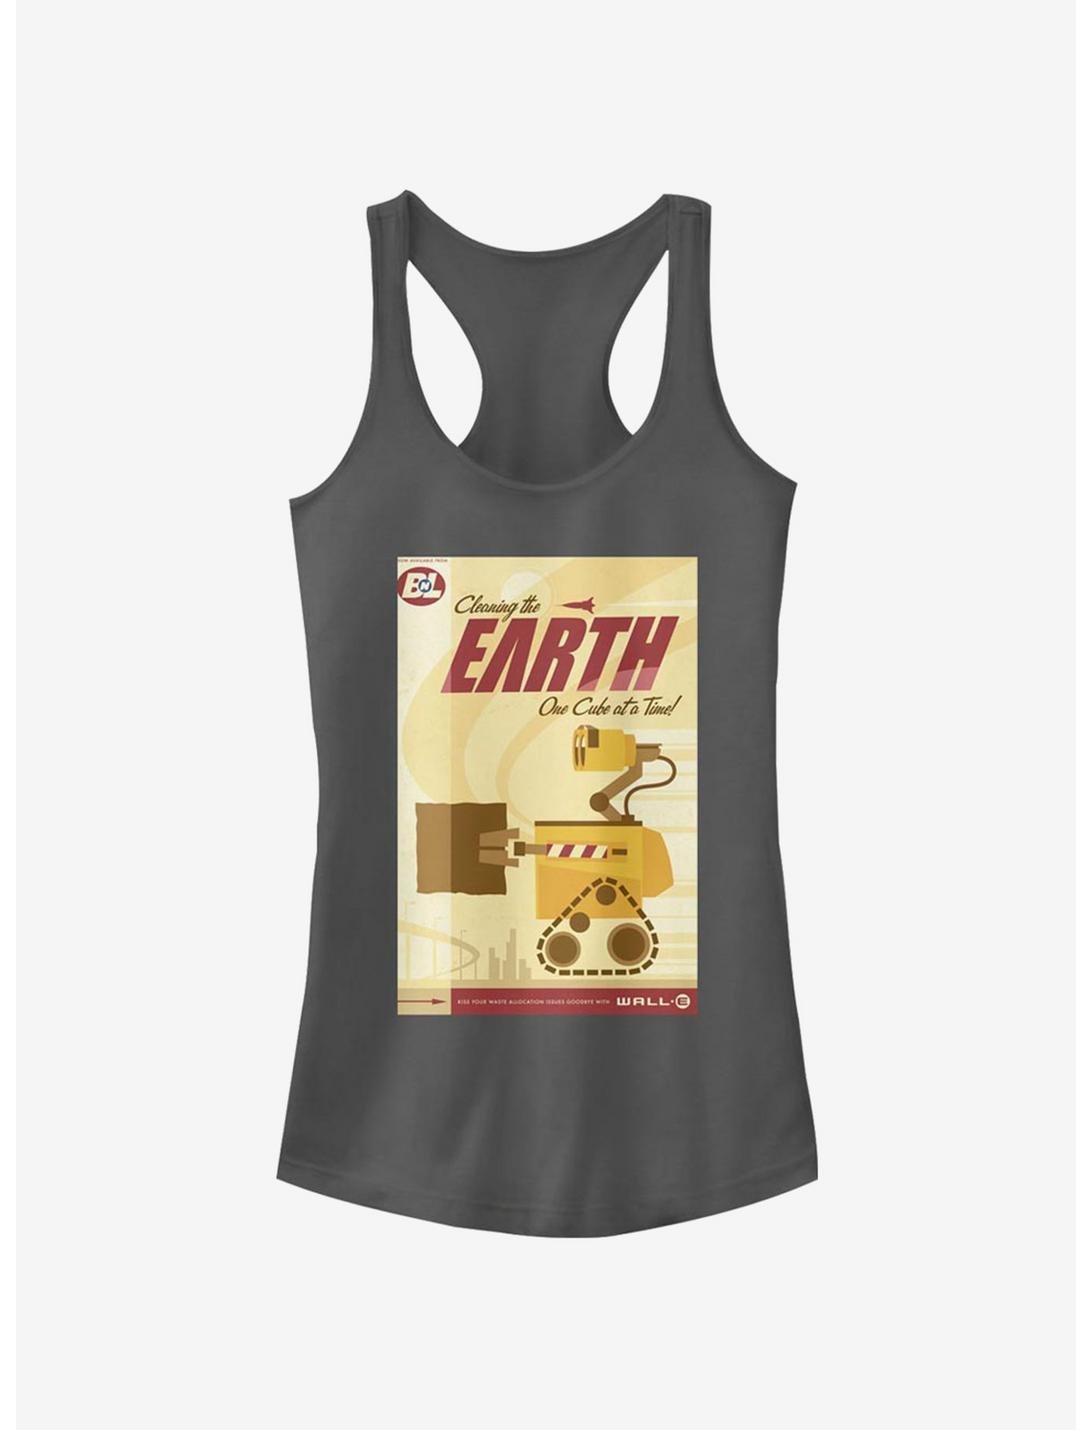 Disney Pixar Wall-E Cleaning The Earth Poster Girls Tank, CHARCOAL, hi-res